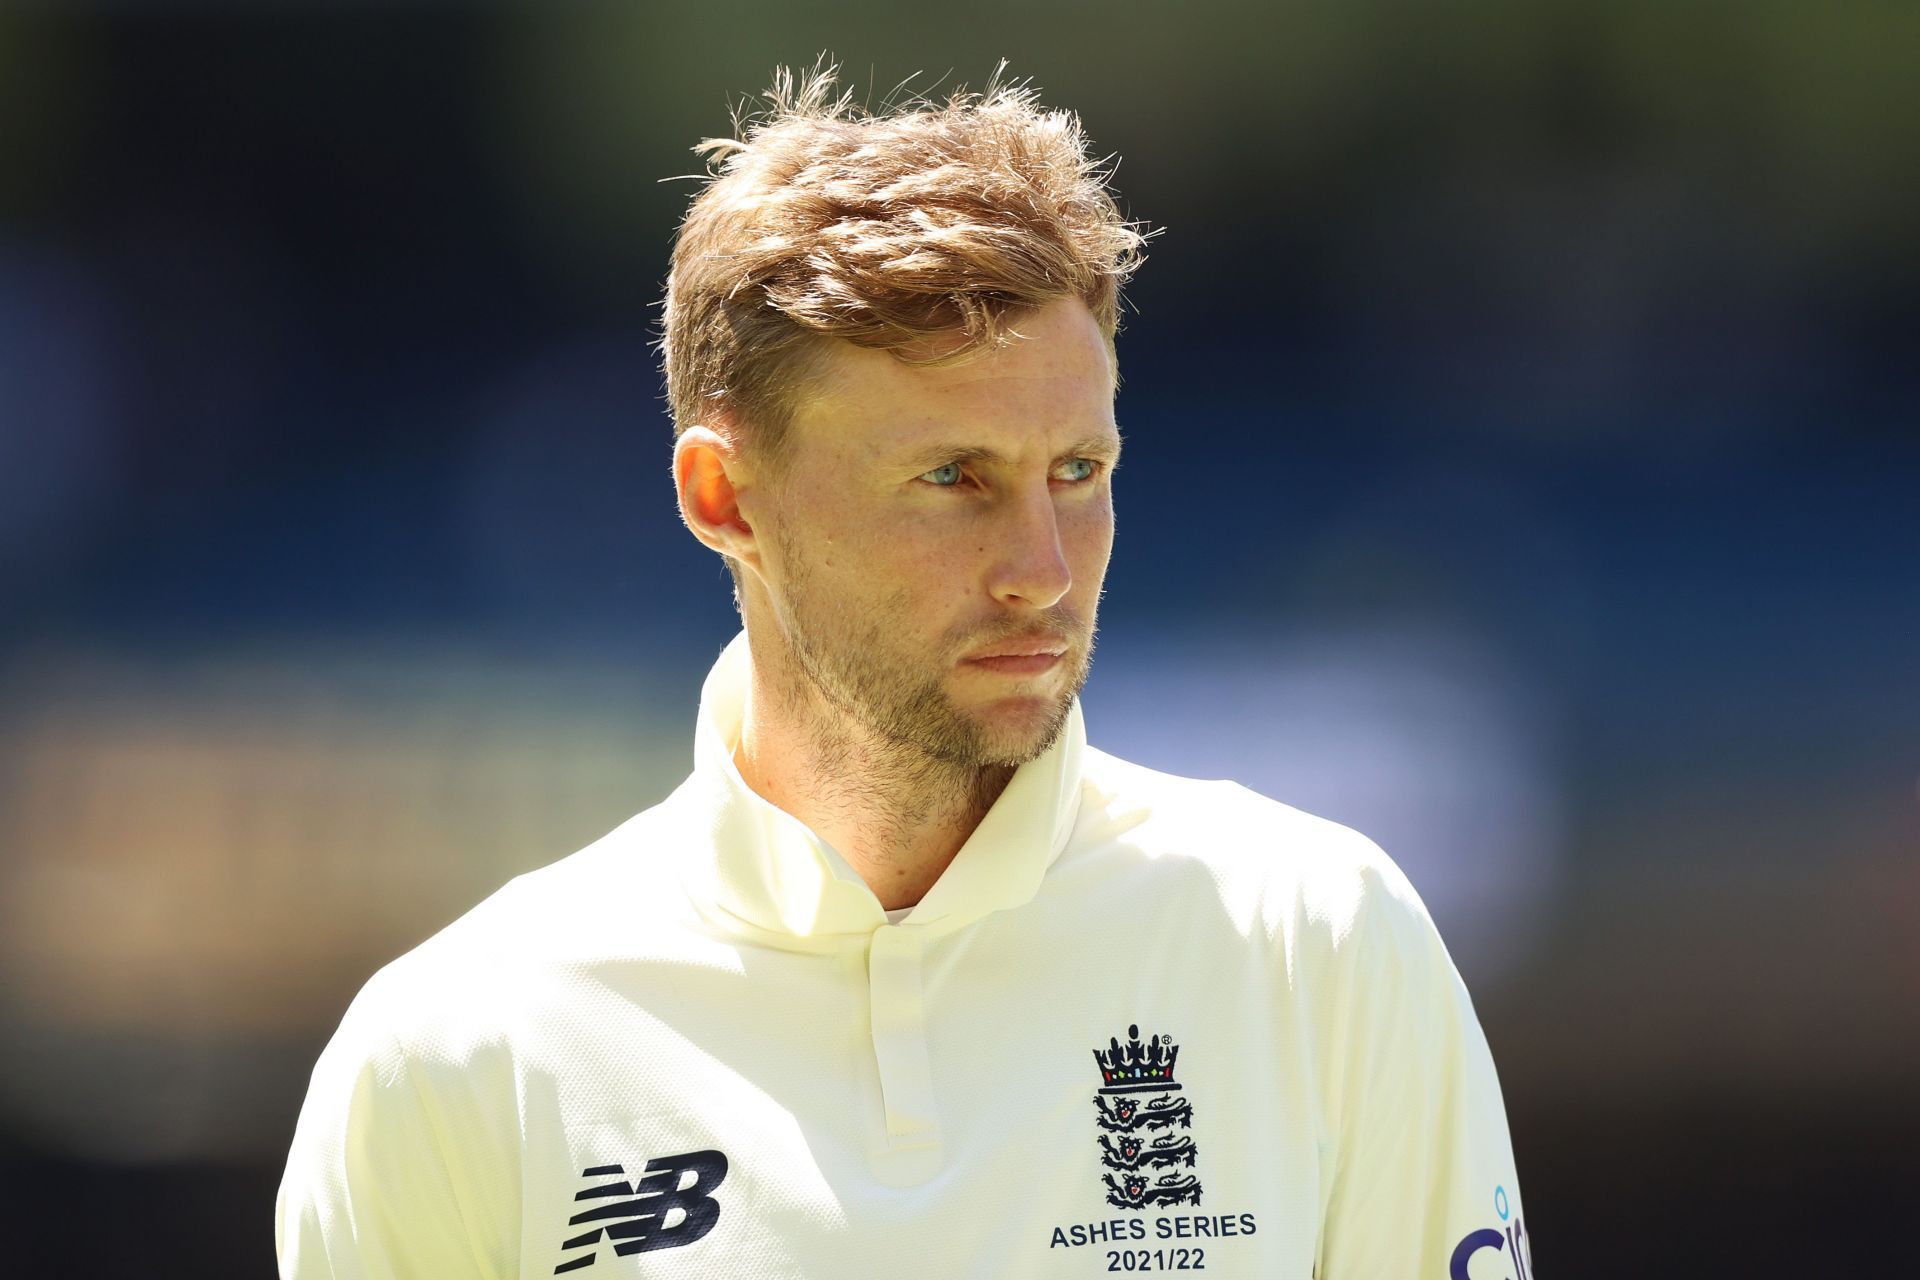 Joe Root has led a lone fight for England in The Ashes.